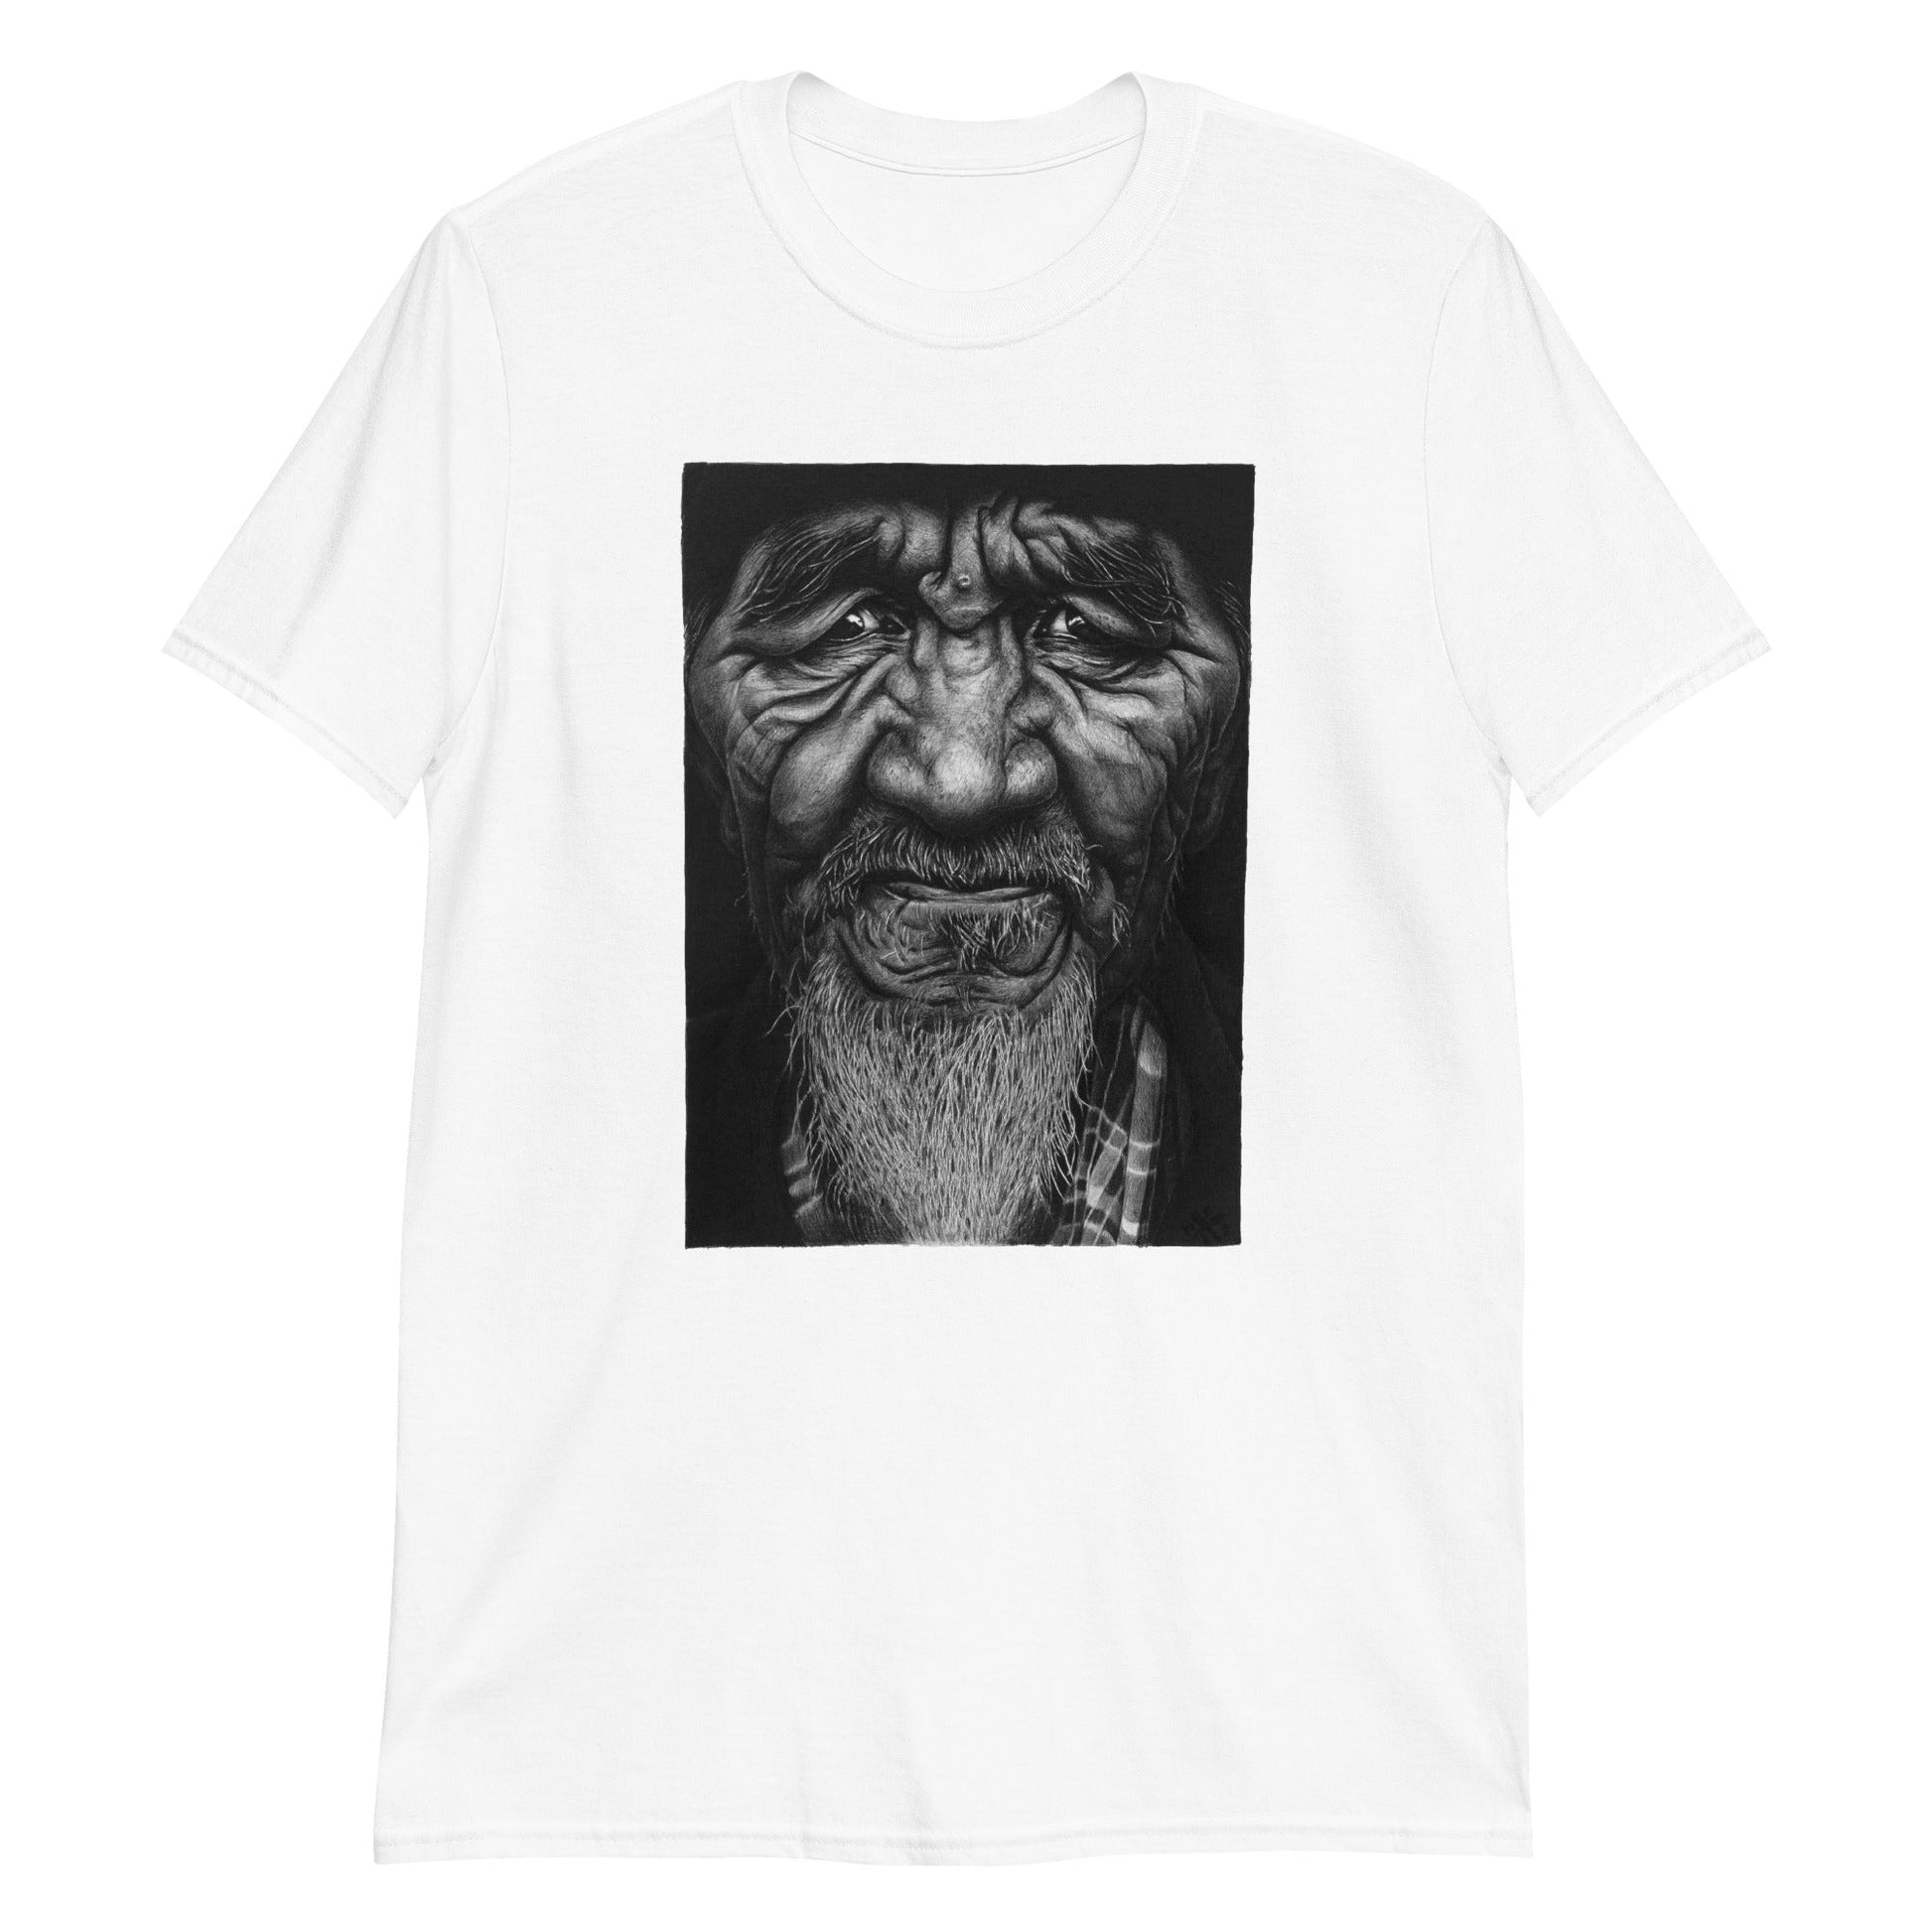 "Windows to the soul" - The Exile prison art Print on Demand The Exile Short Sleeves T-Shirt Small